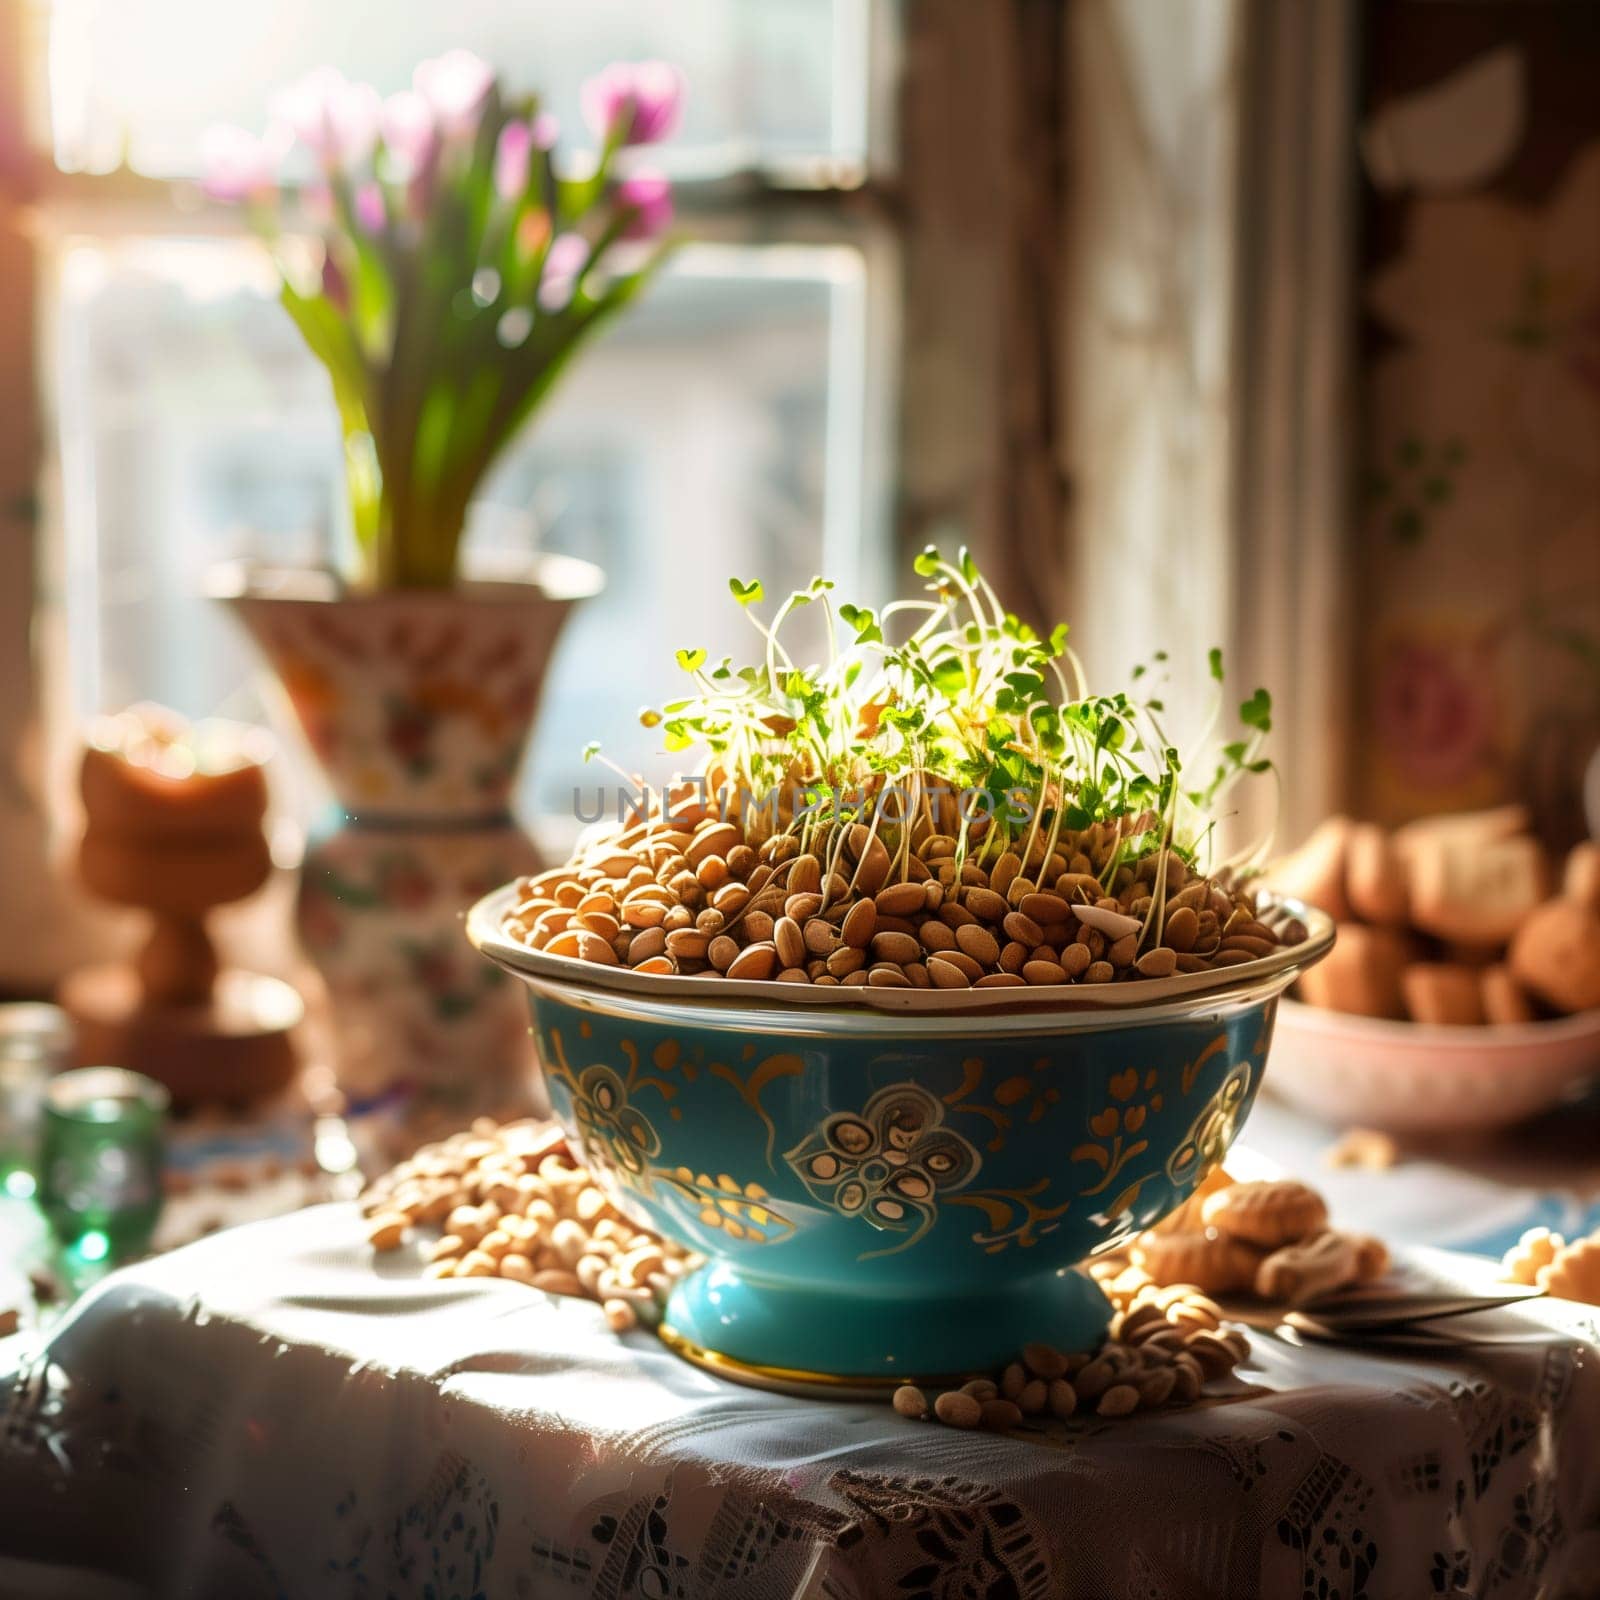 Sprouted wheat in a traditional dish stands on the table by the window in the kitchen early in the morning, close-up side view.